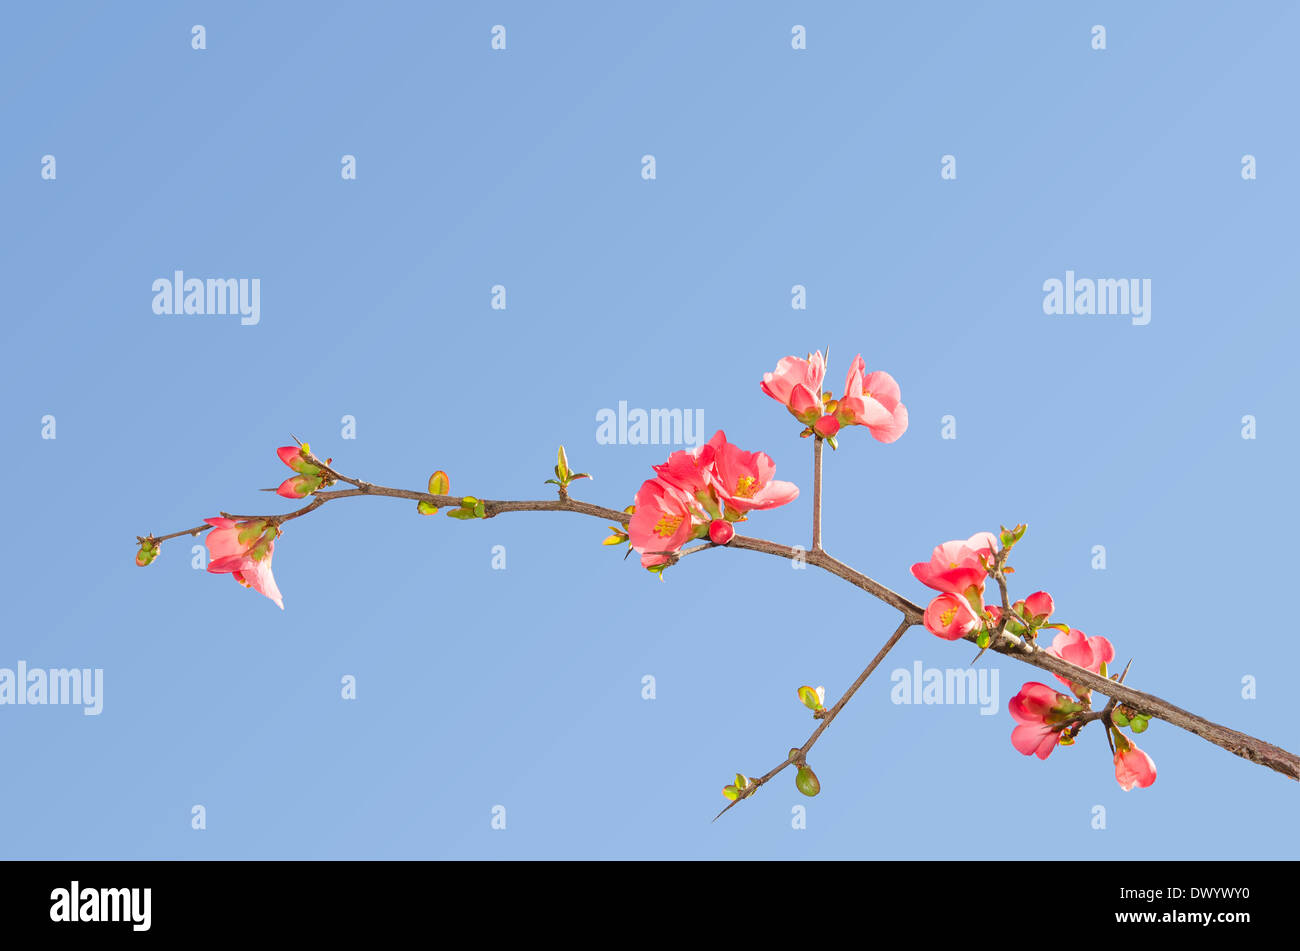 Single blooming branch of flowering quince bush against blue sky with free place for your text Stock Photo